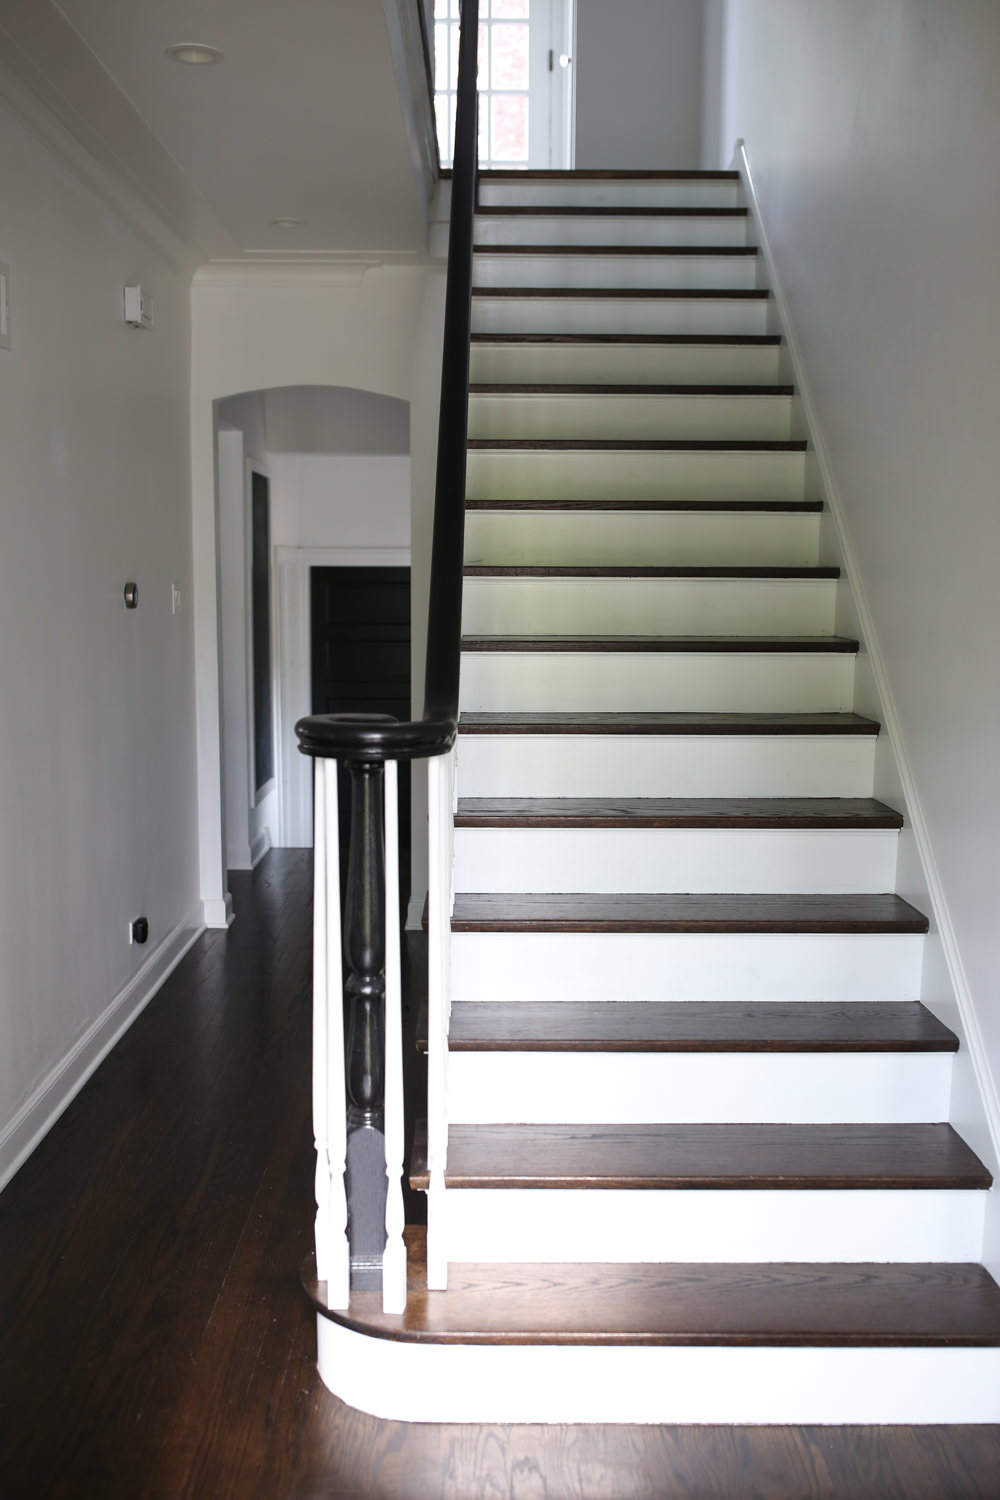 Our Sisal Stair Runner Before and After